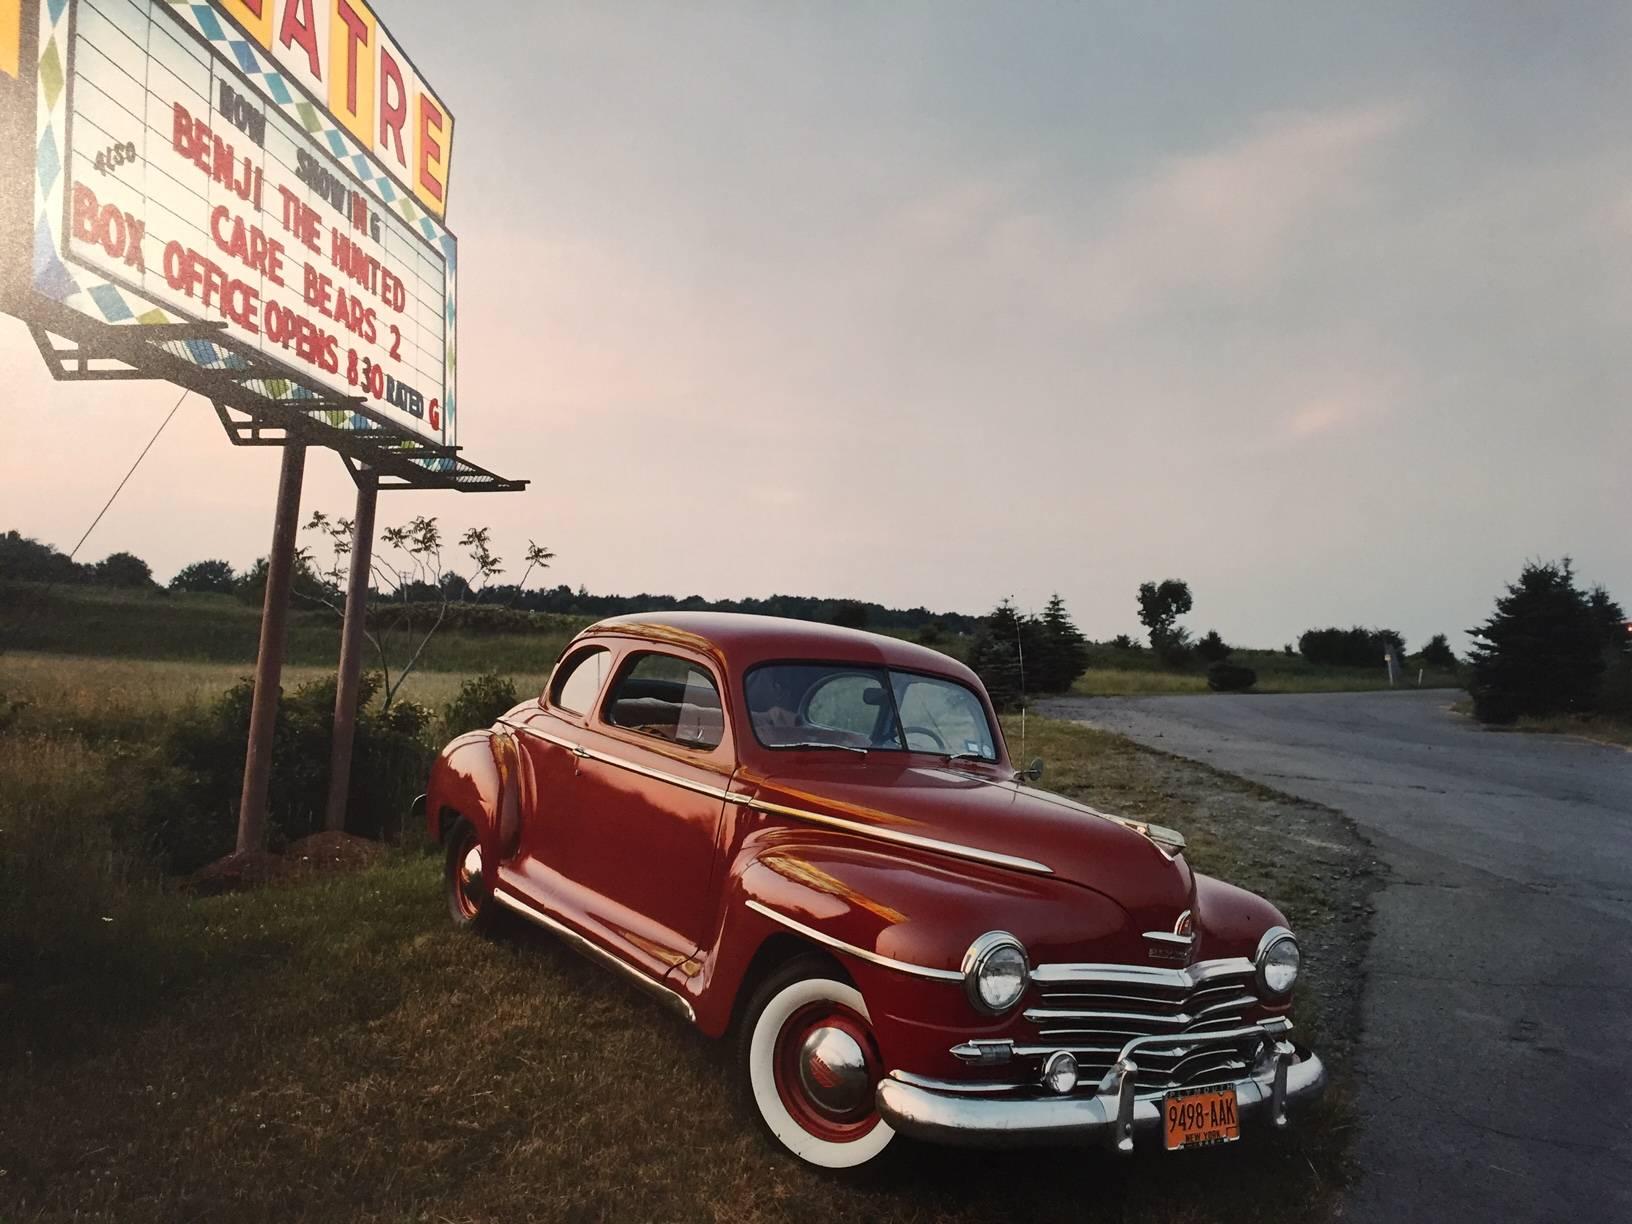 Bruce Wrighton Color Photograph - 1948 Plymouth Special Deluxe Coupe, from the series "Dinosaurs and Dreamboats"